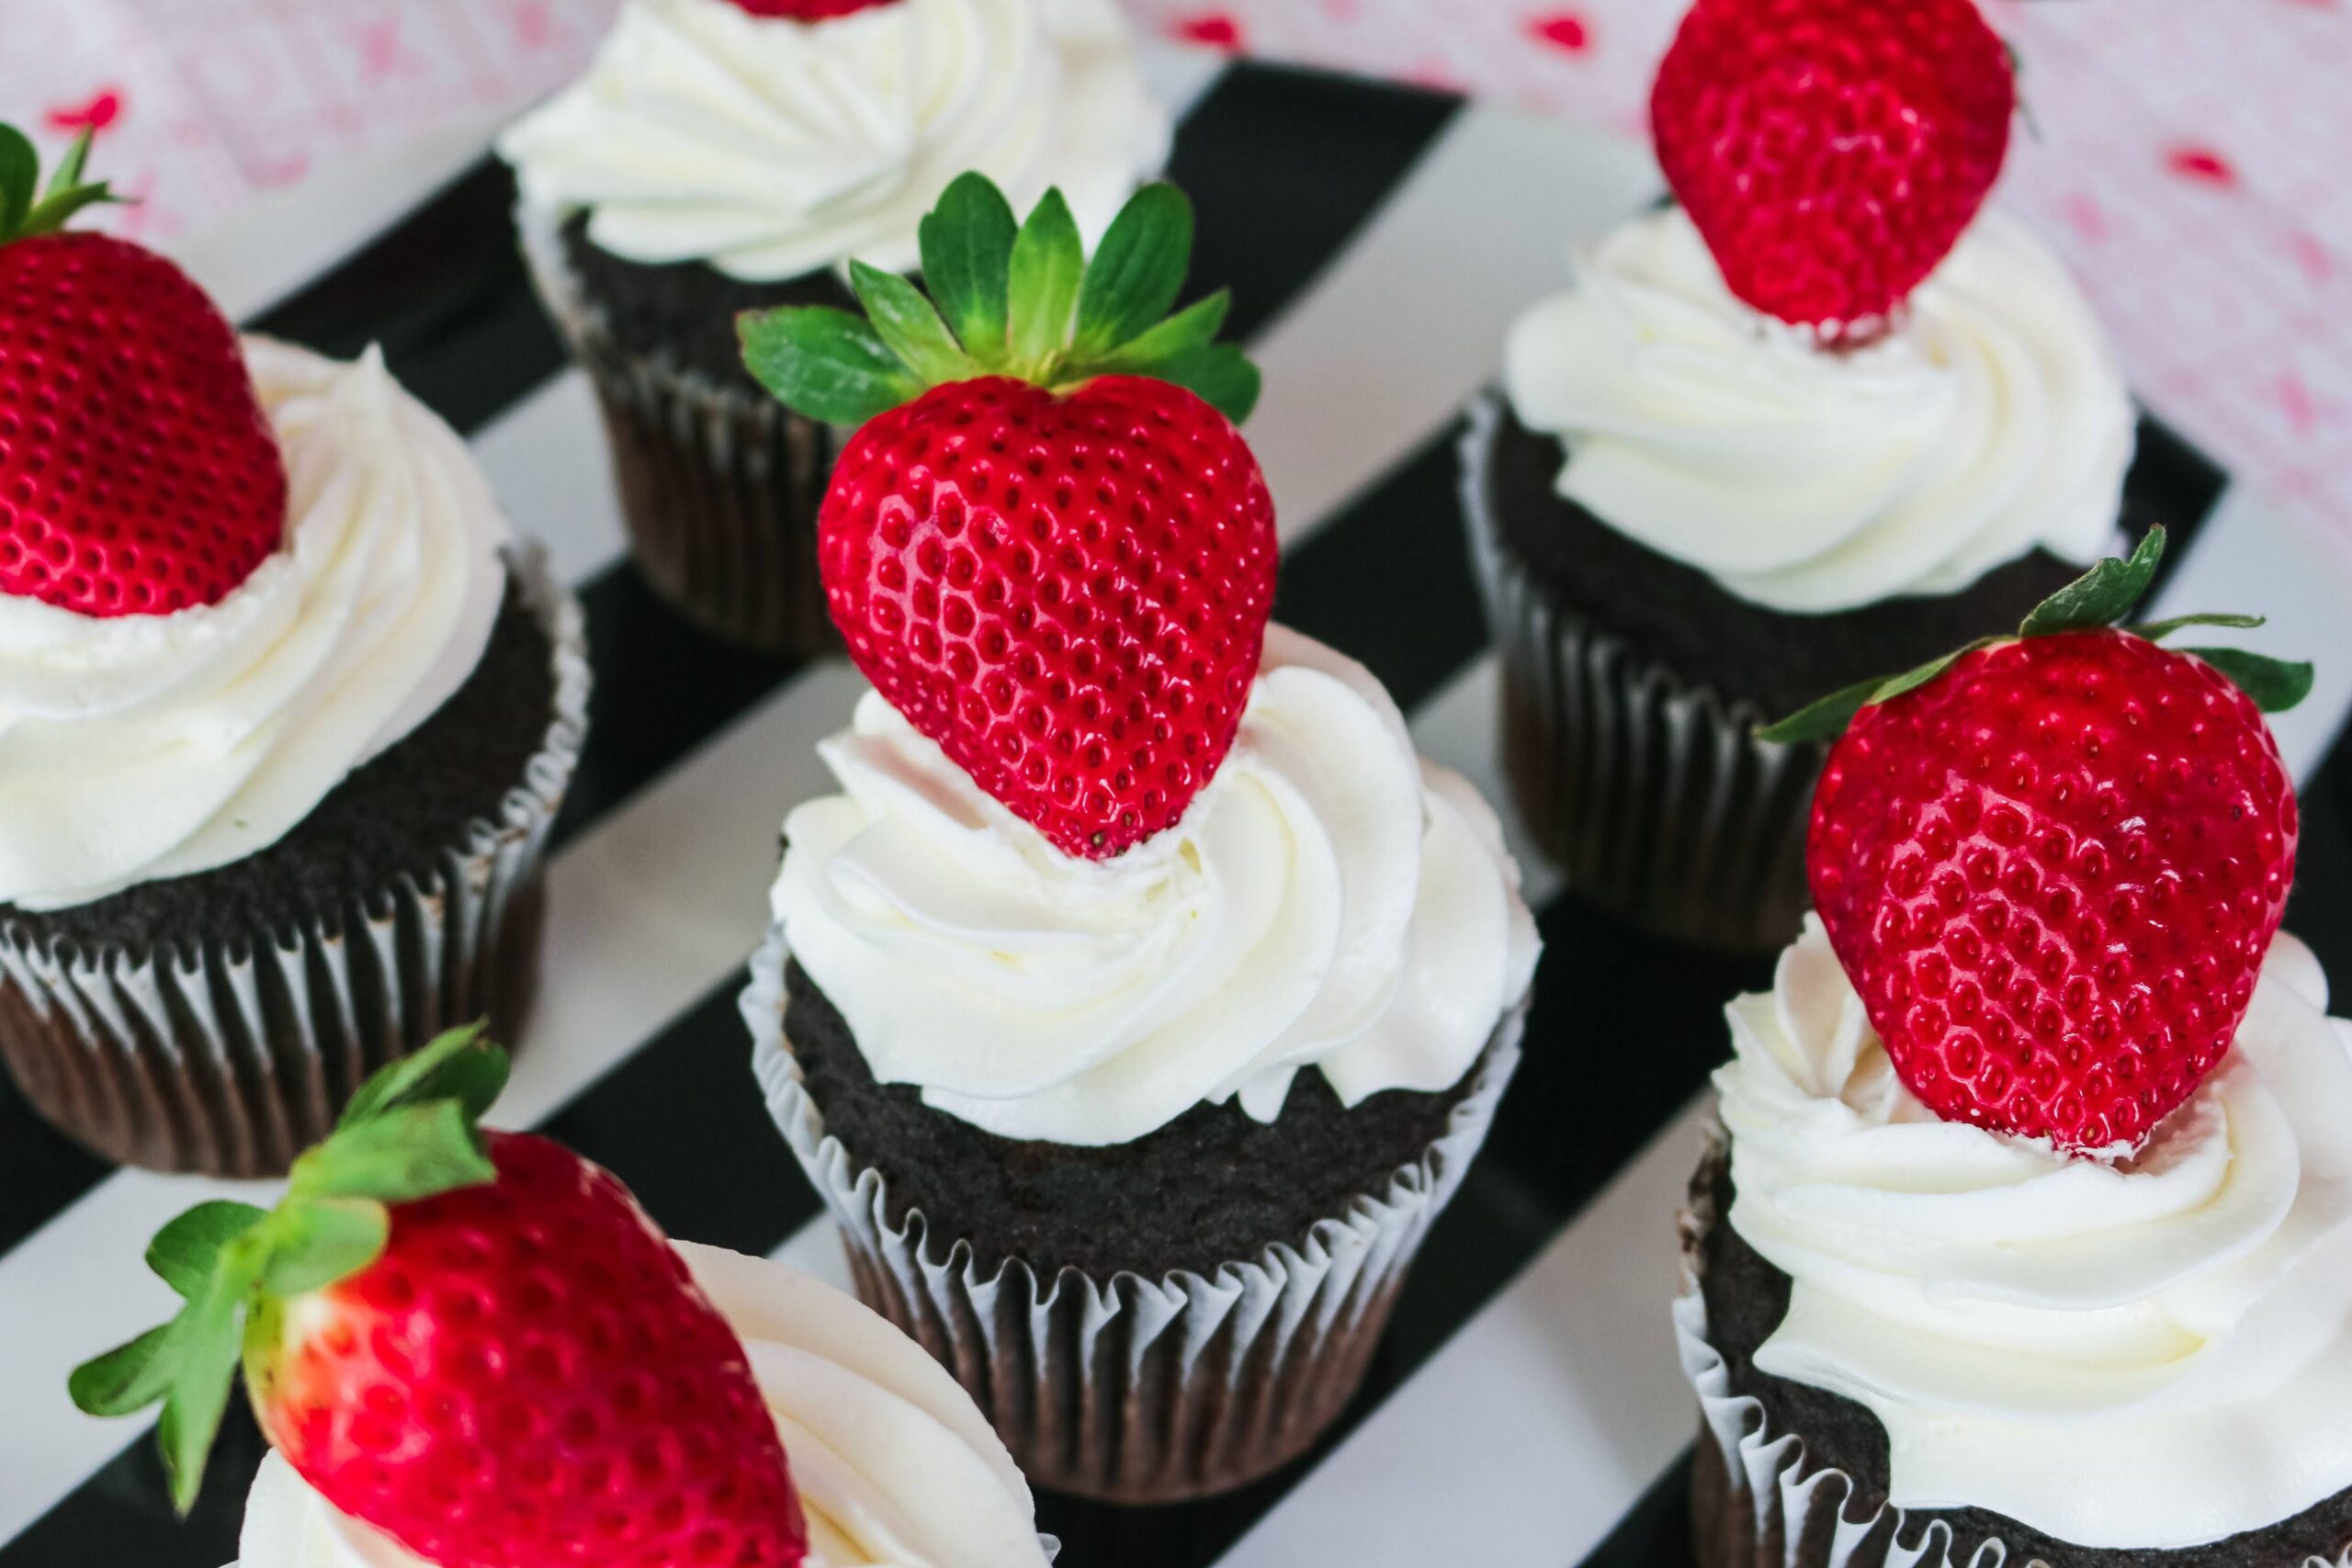 A close up of cupcakes with strawberries on top